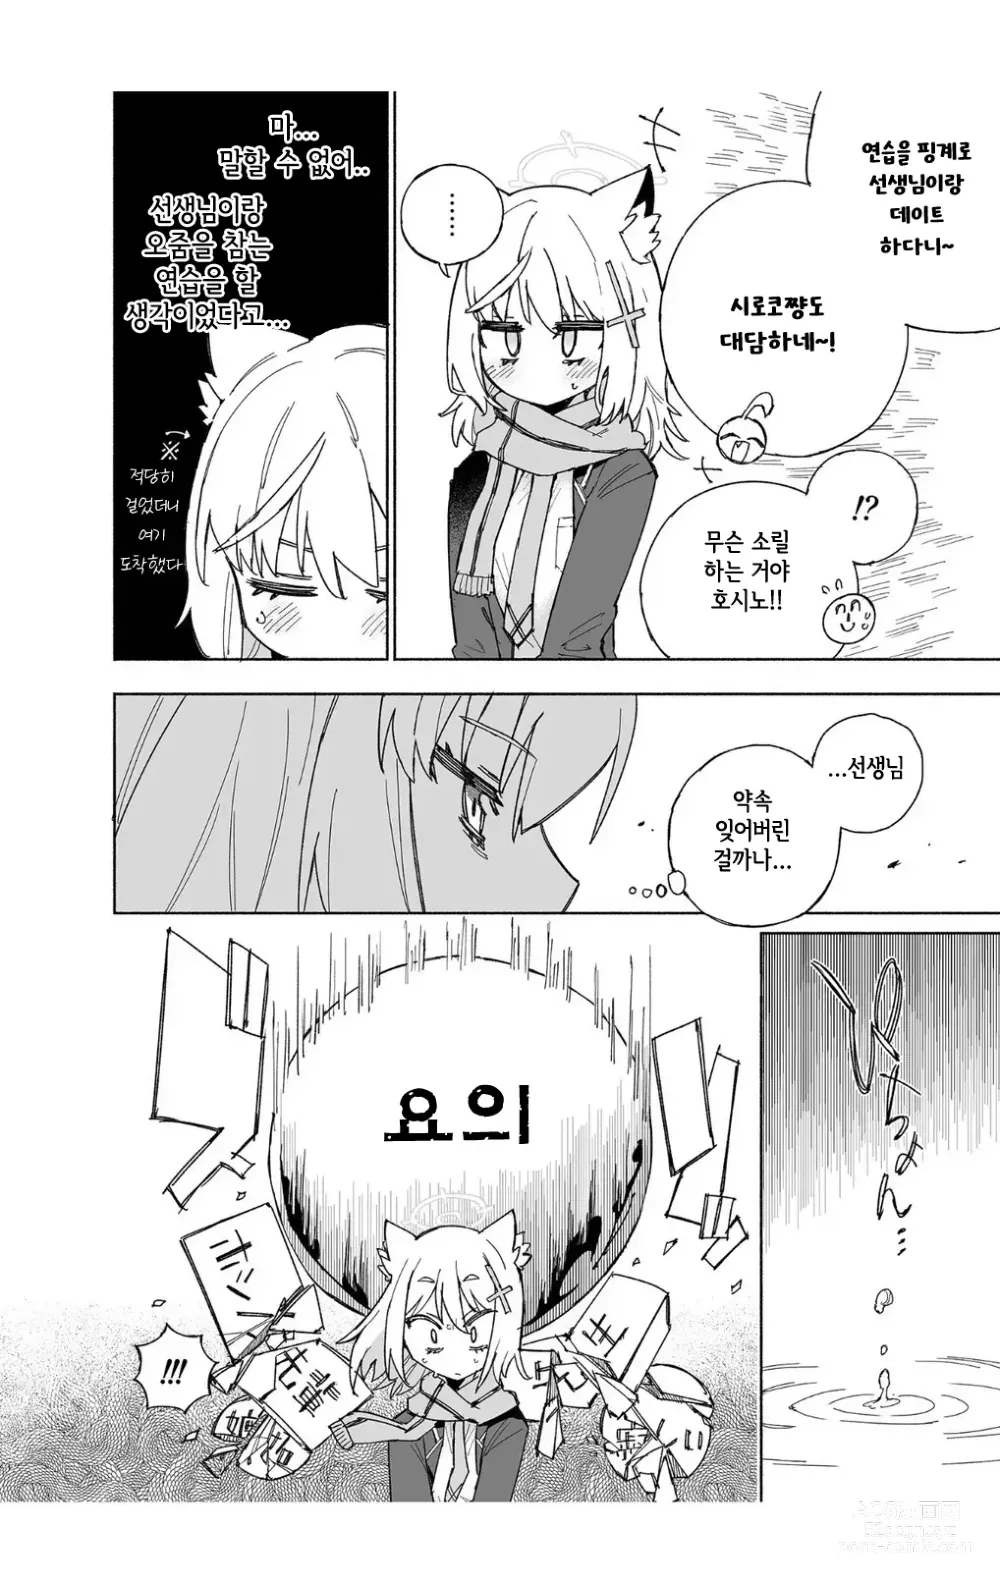 Page 9 of doujinshi 늑대의 물